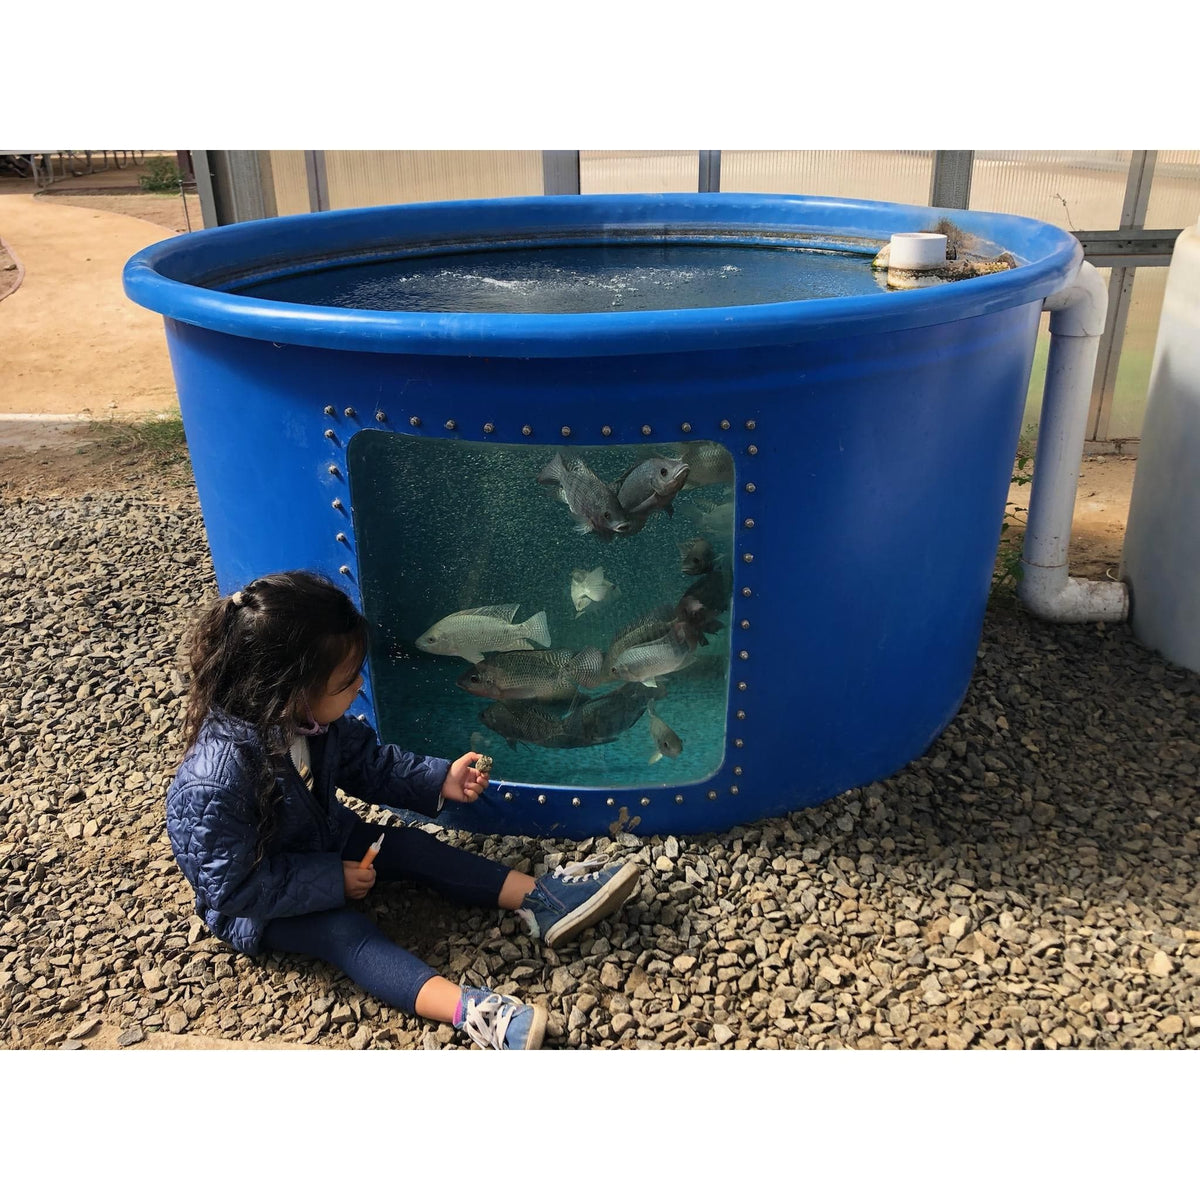 A little girl mesmerized in front of a blue fish tank, observing the captivating Go Green Aquaponics system.